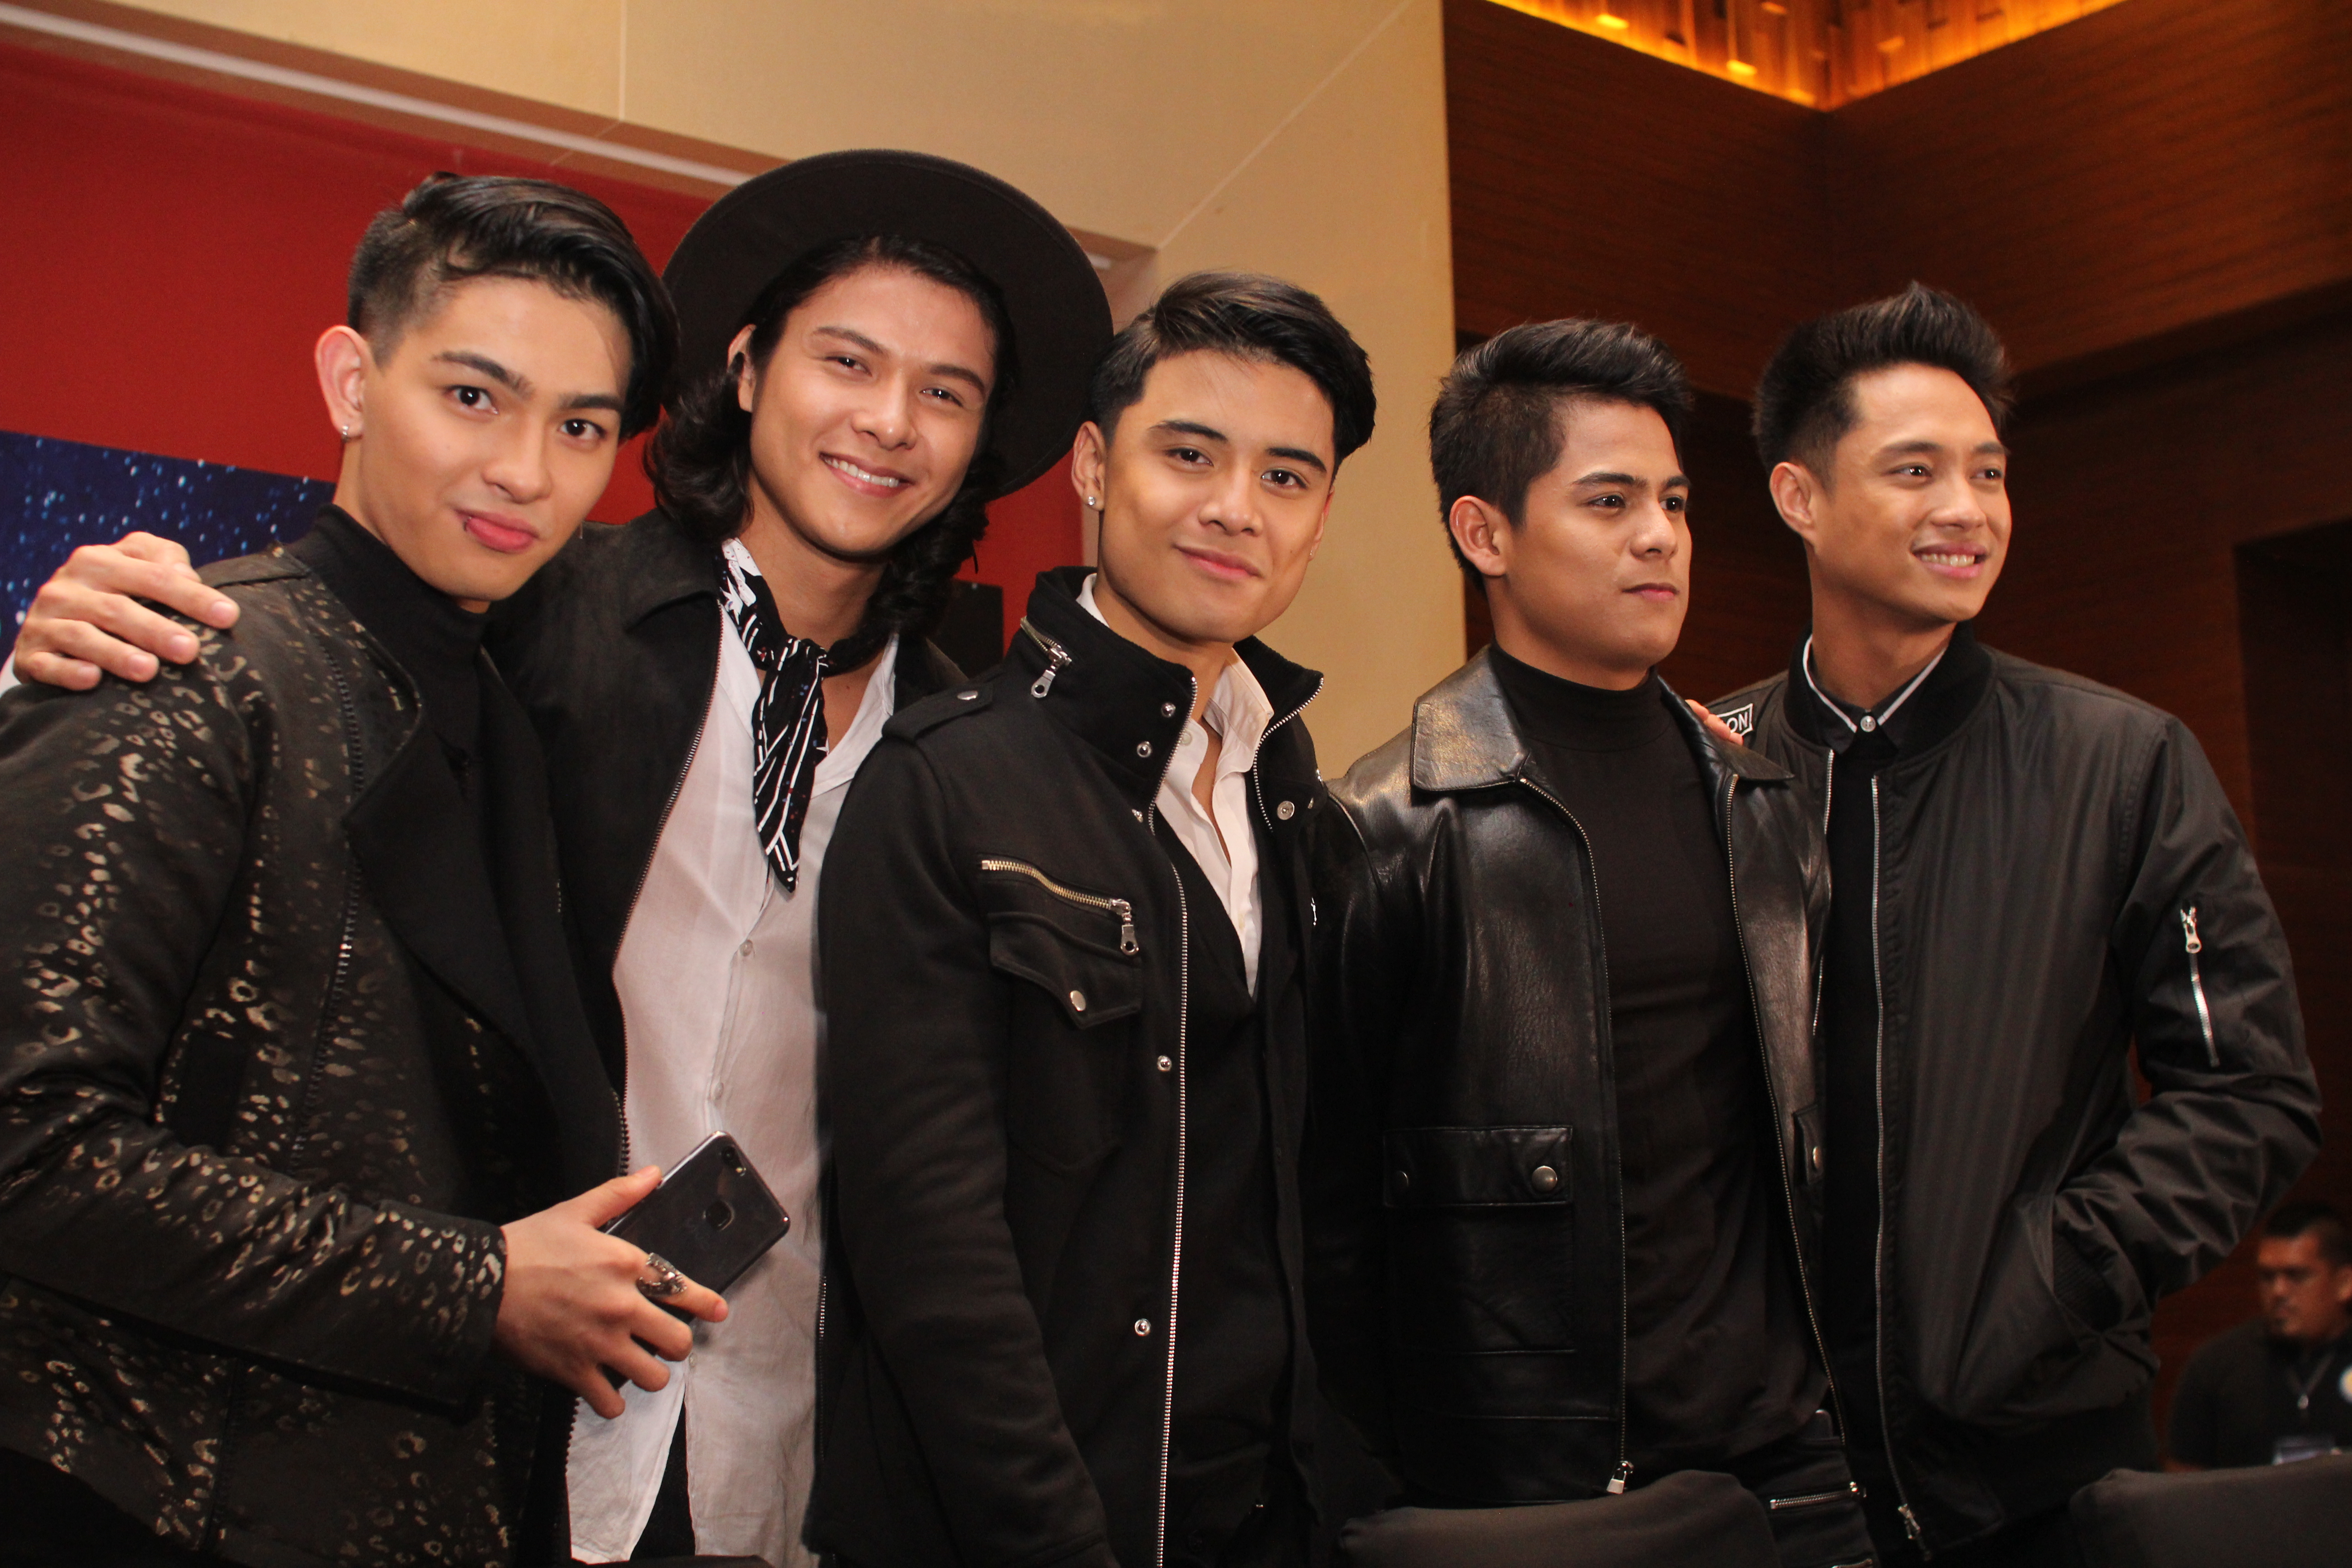 Can you Handle the BoyBandPH or the New Vivo V7 as they take over Bacolod?